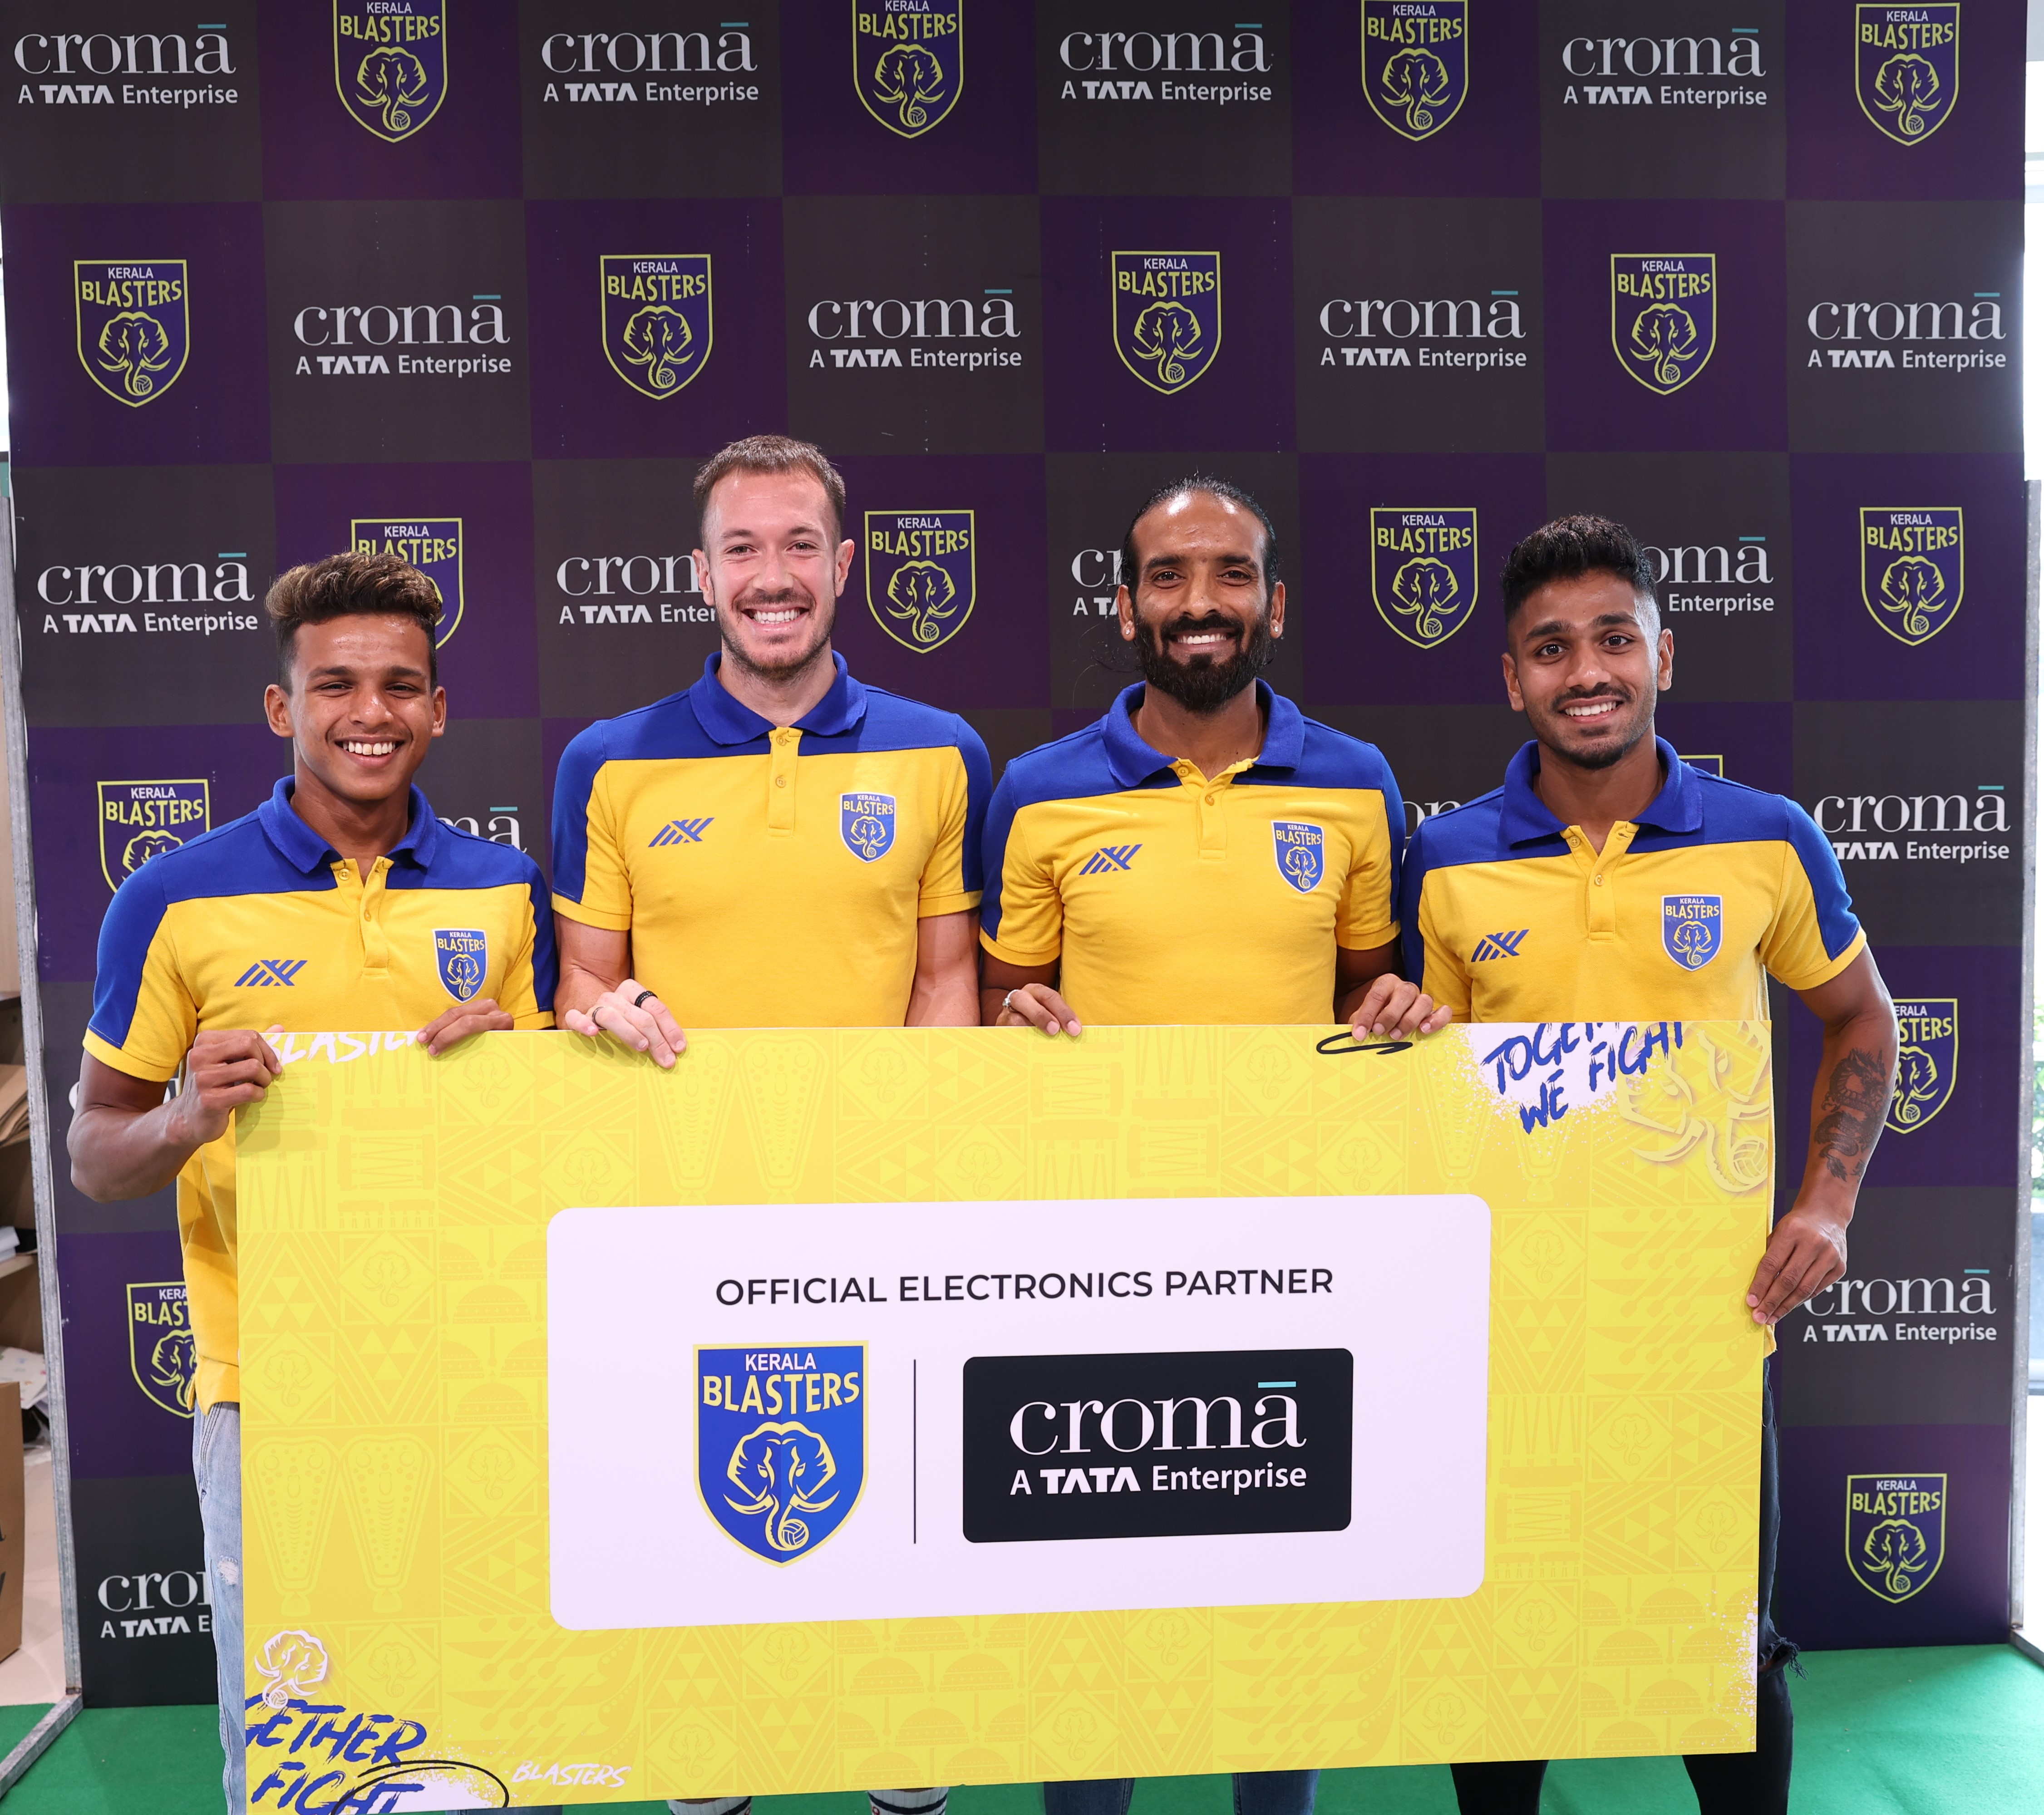 Croma will be an Official Electronics Partner for Kerala Blasters Football Club in the Indian Super League 2022–23